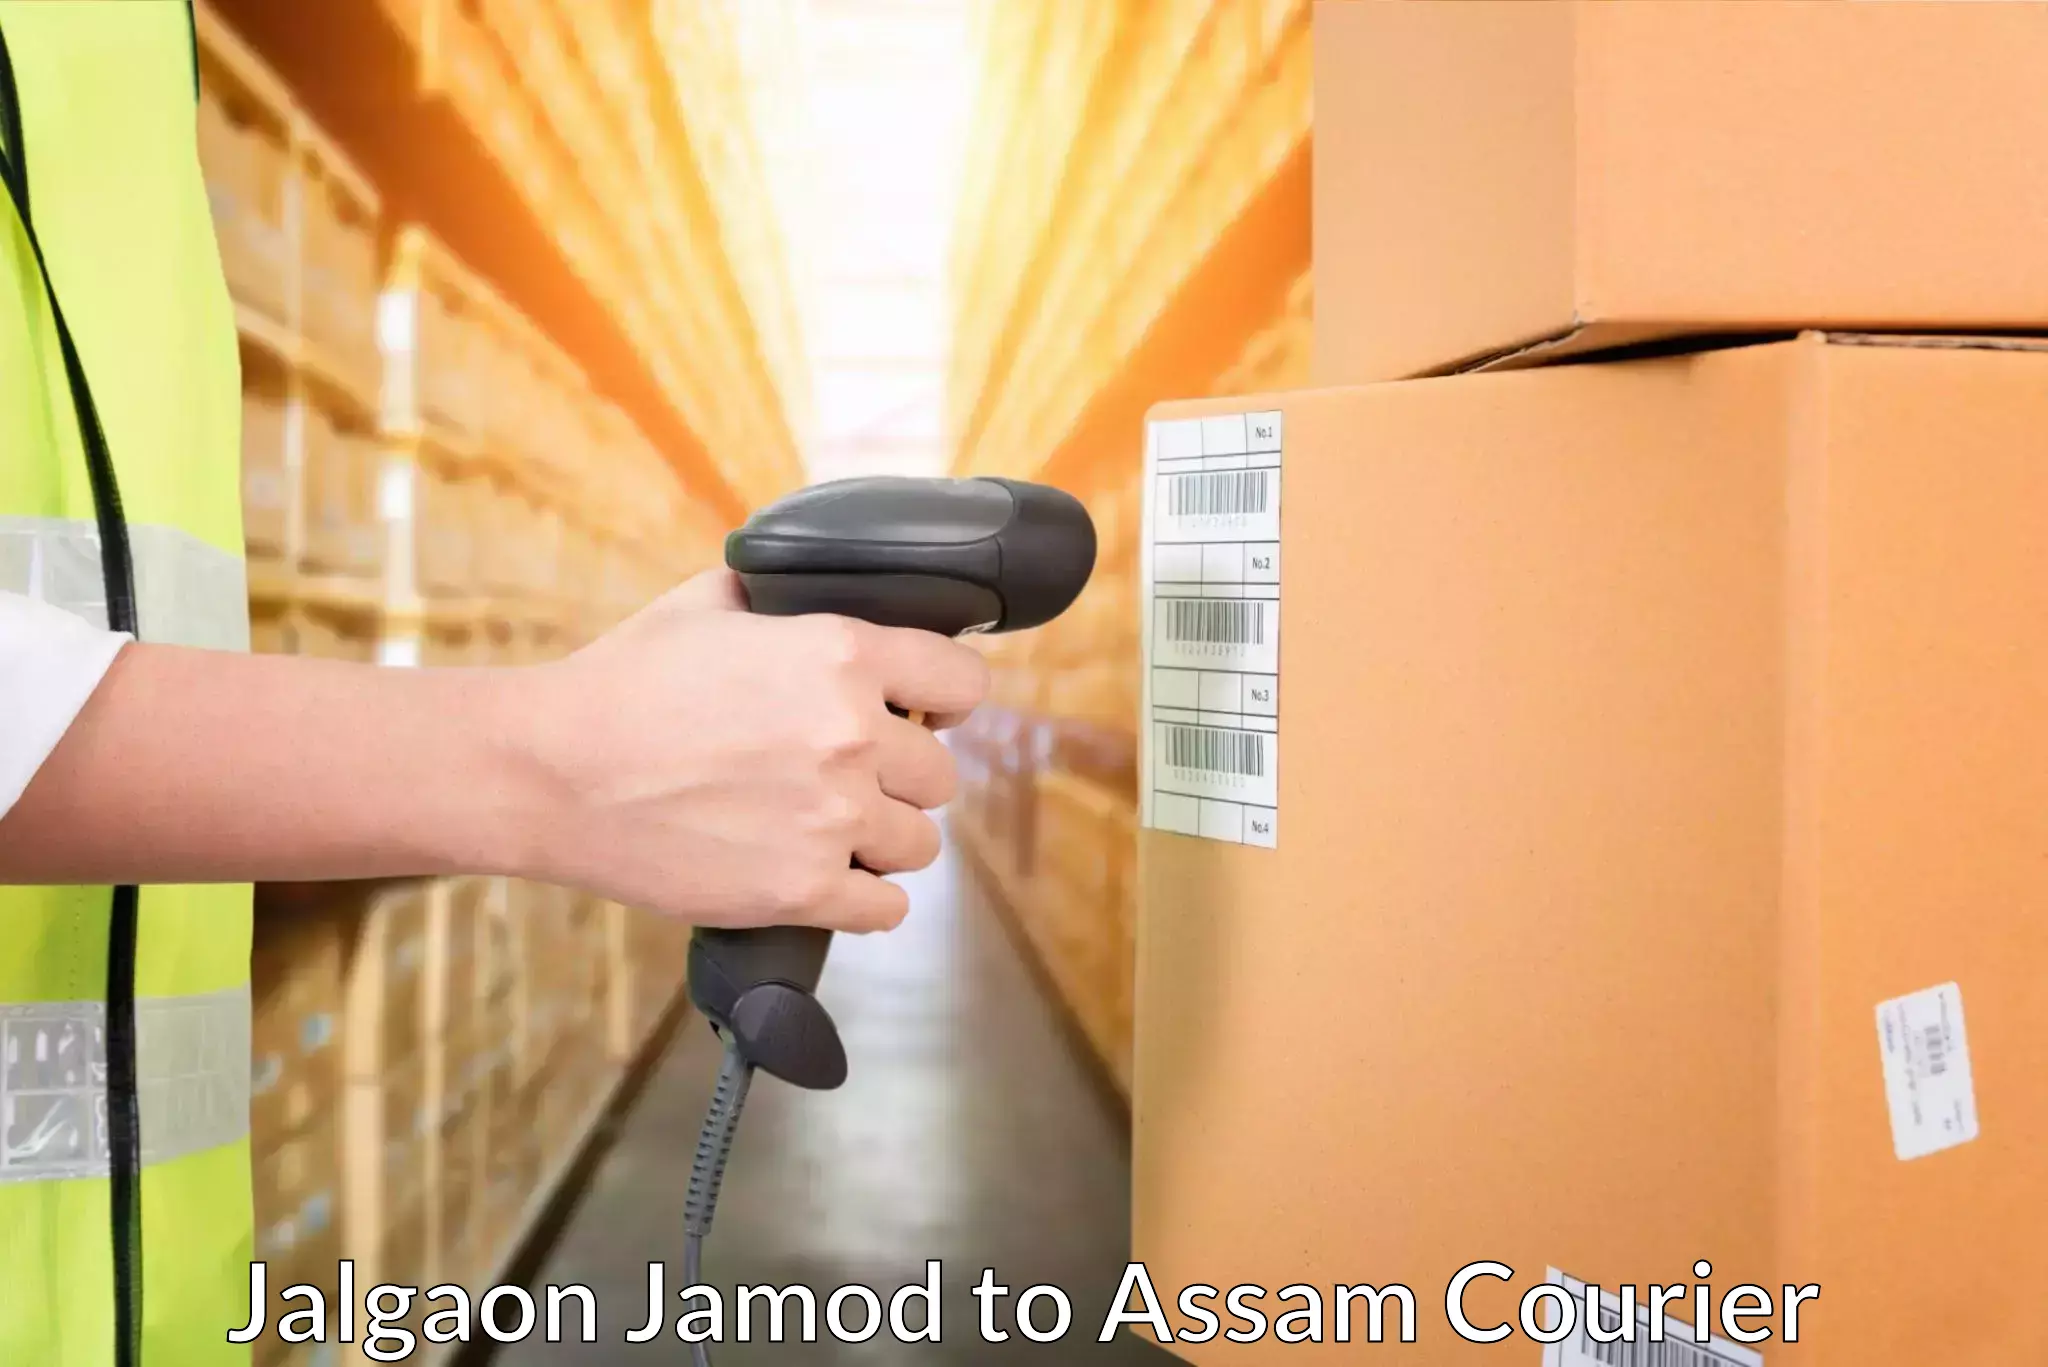 Supply chain delivery Jalgaon Jamod to Jagiroad